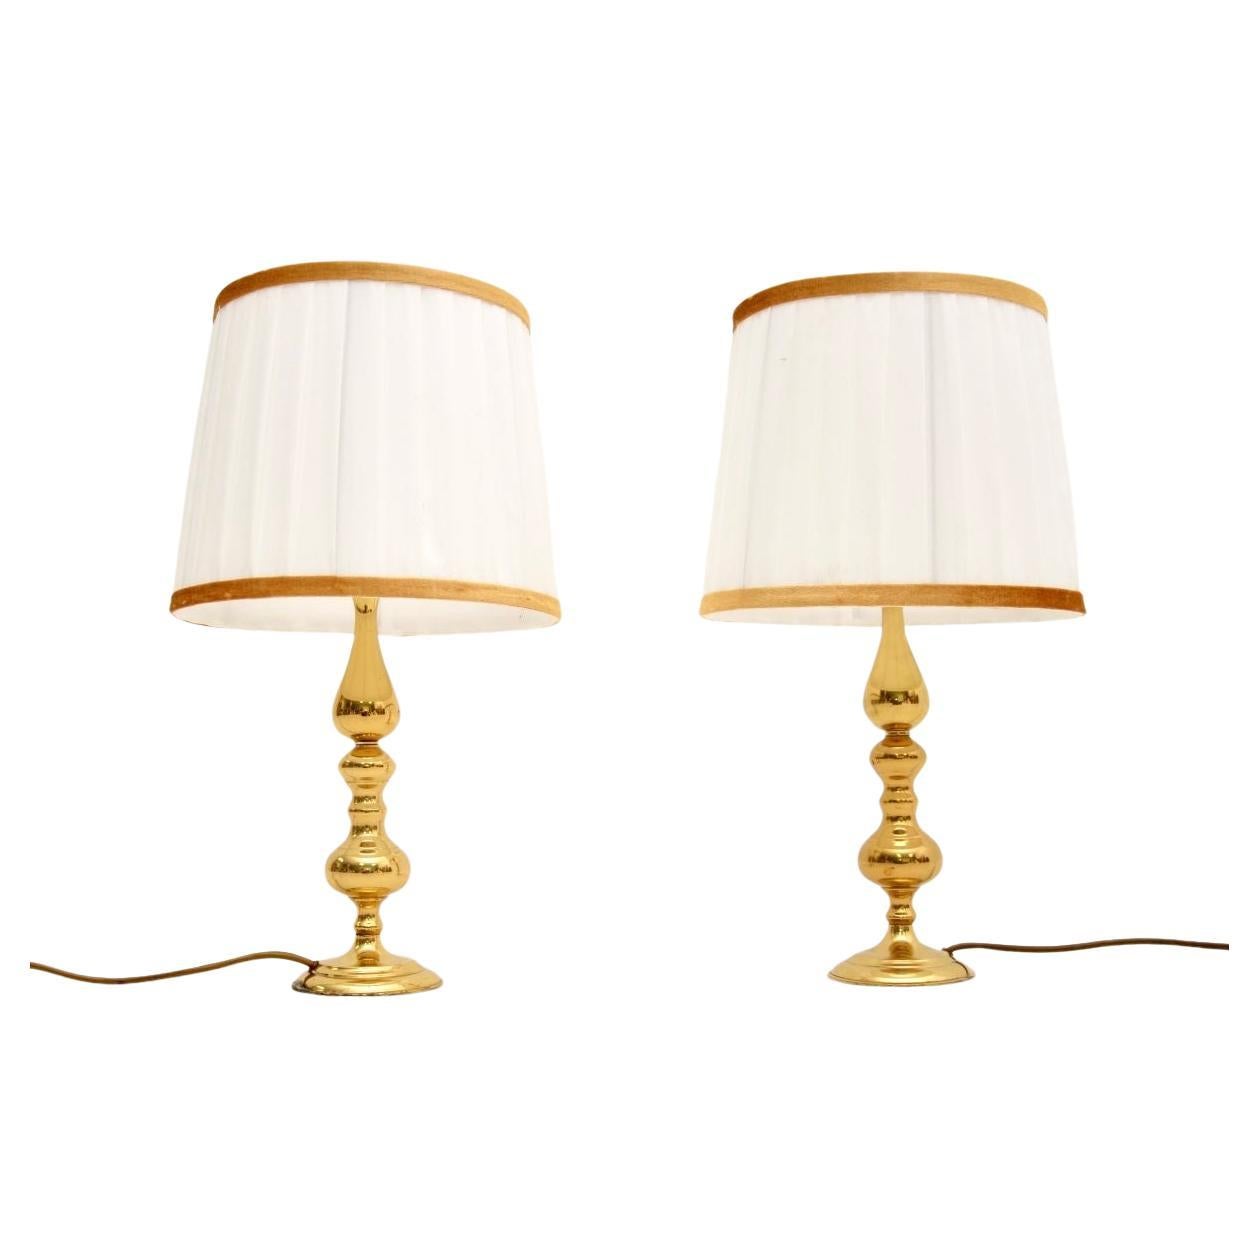 Pair of Vintage Brass Table Lamps For Sale